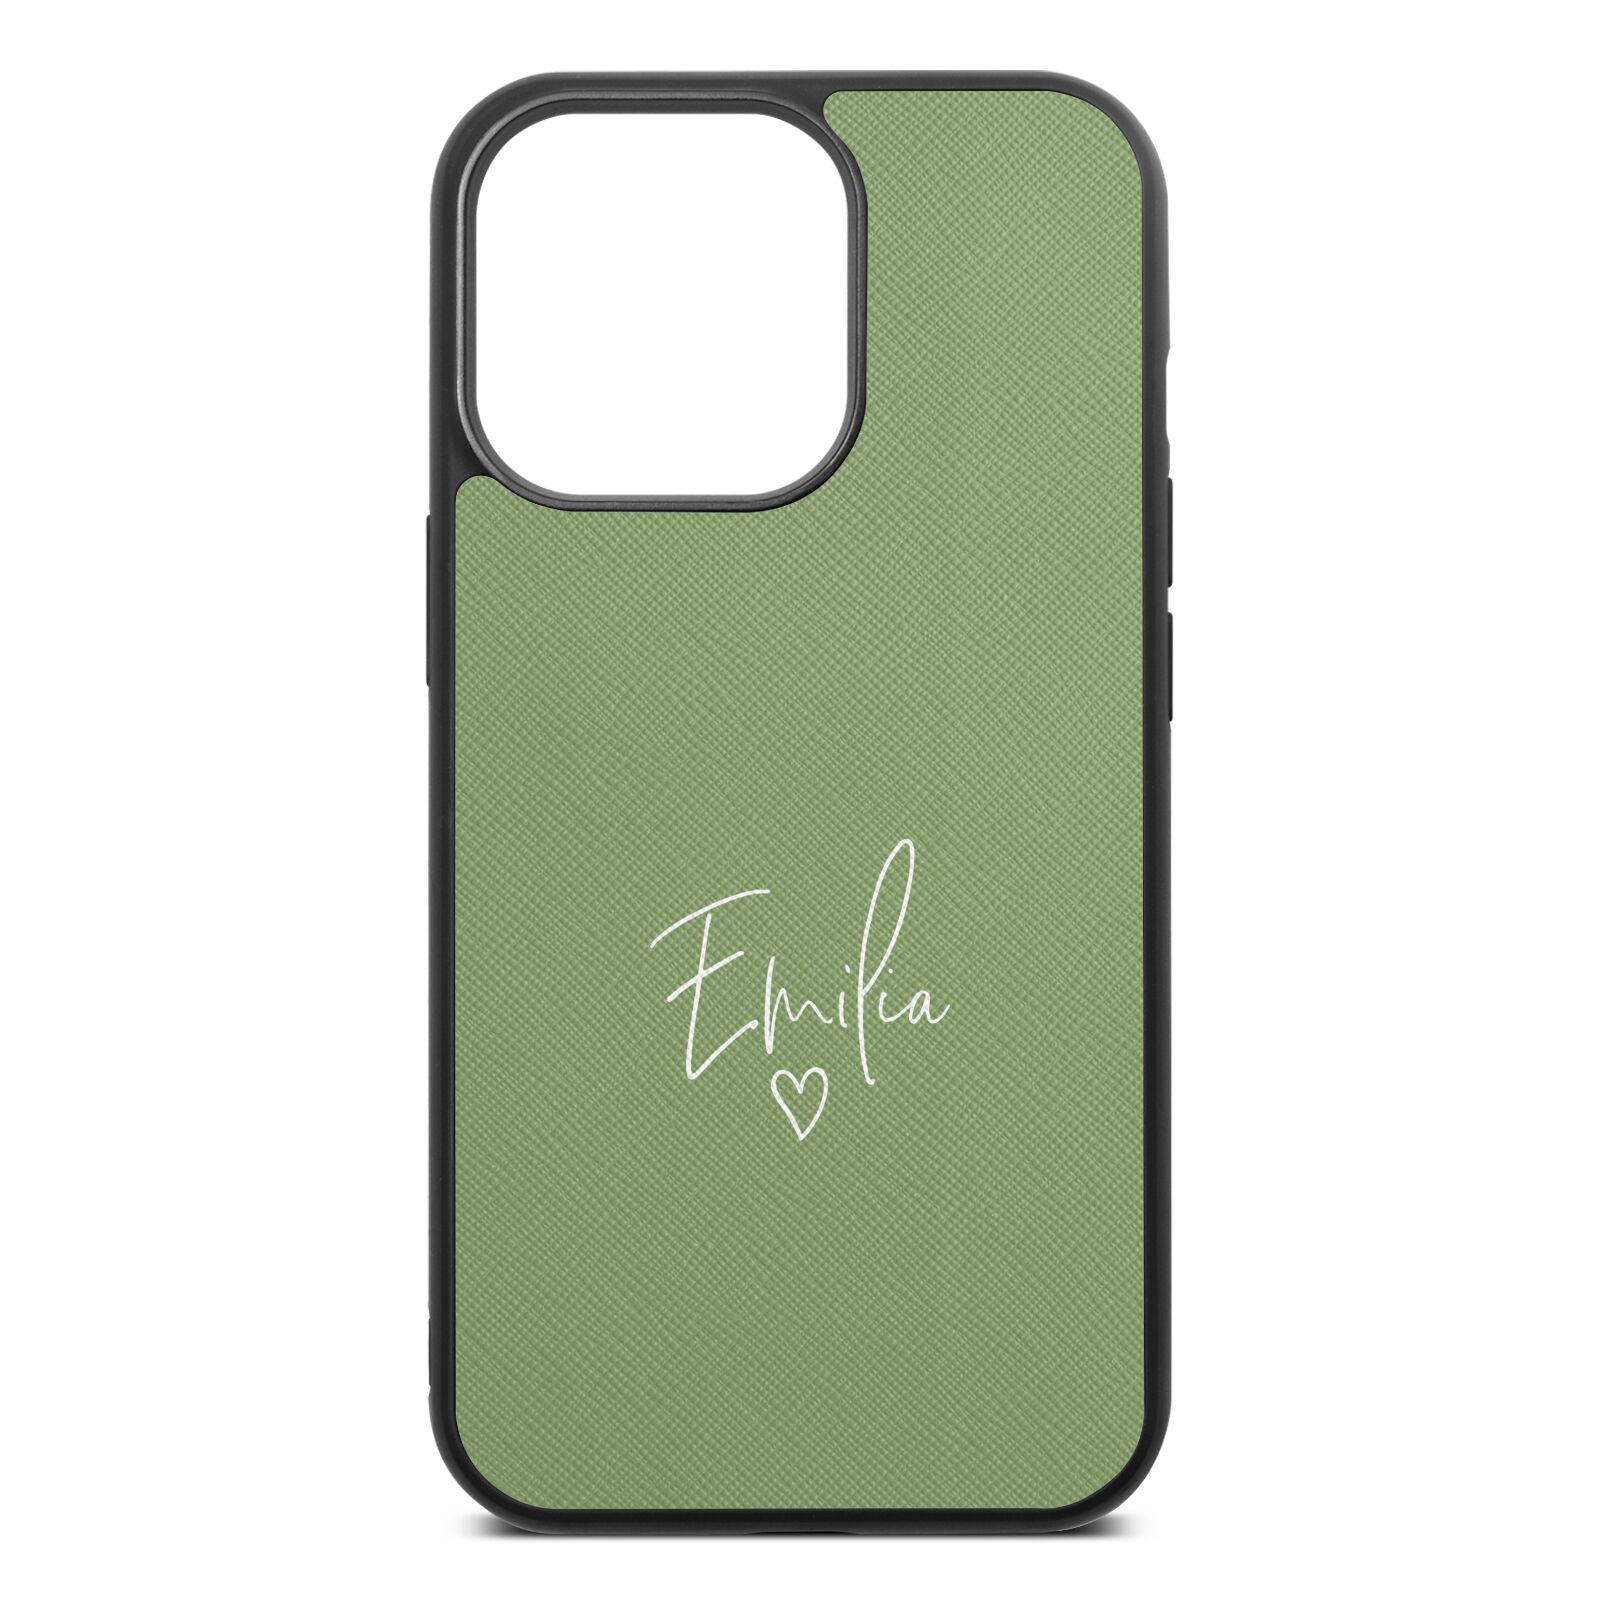 White Handwritten Name Transparent Lime Saffiano Leather iPhone 13 Pro Case